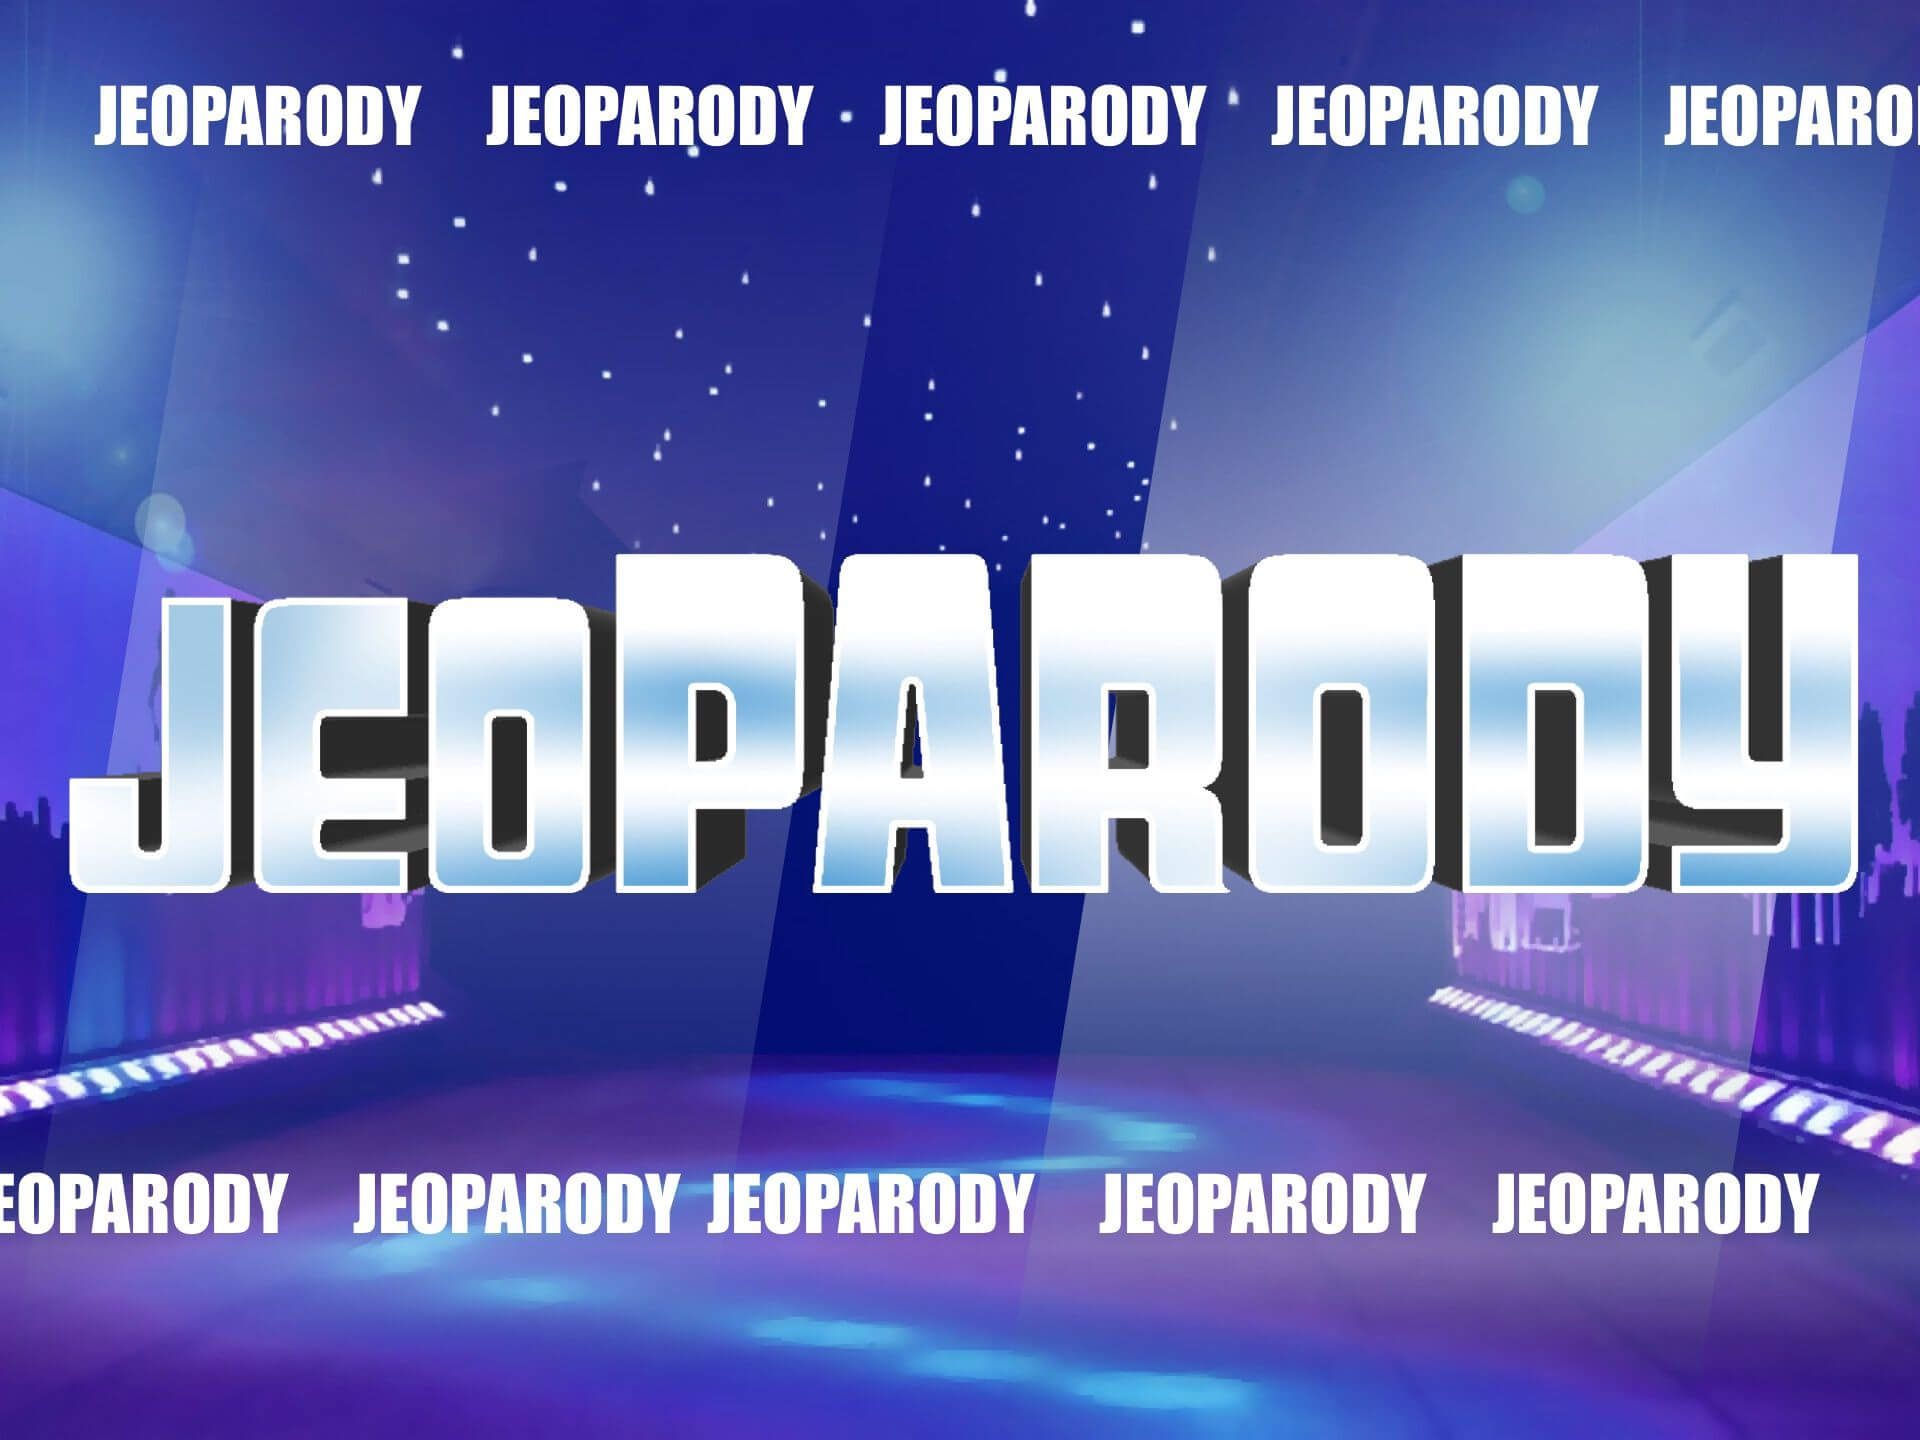 Fully Editable Jeopardy Powerpoint Template Game With Daily Intended For Jeopardy Powerpoint Template With Sound